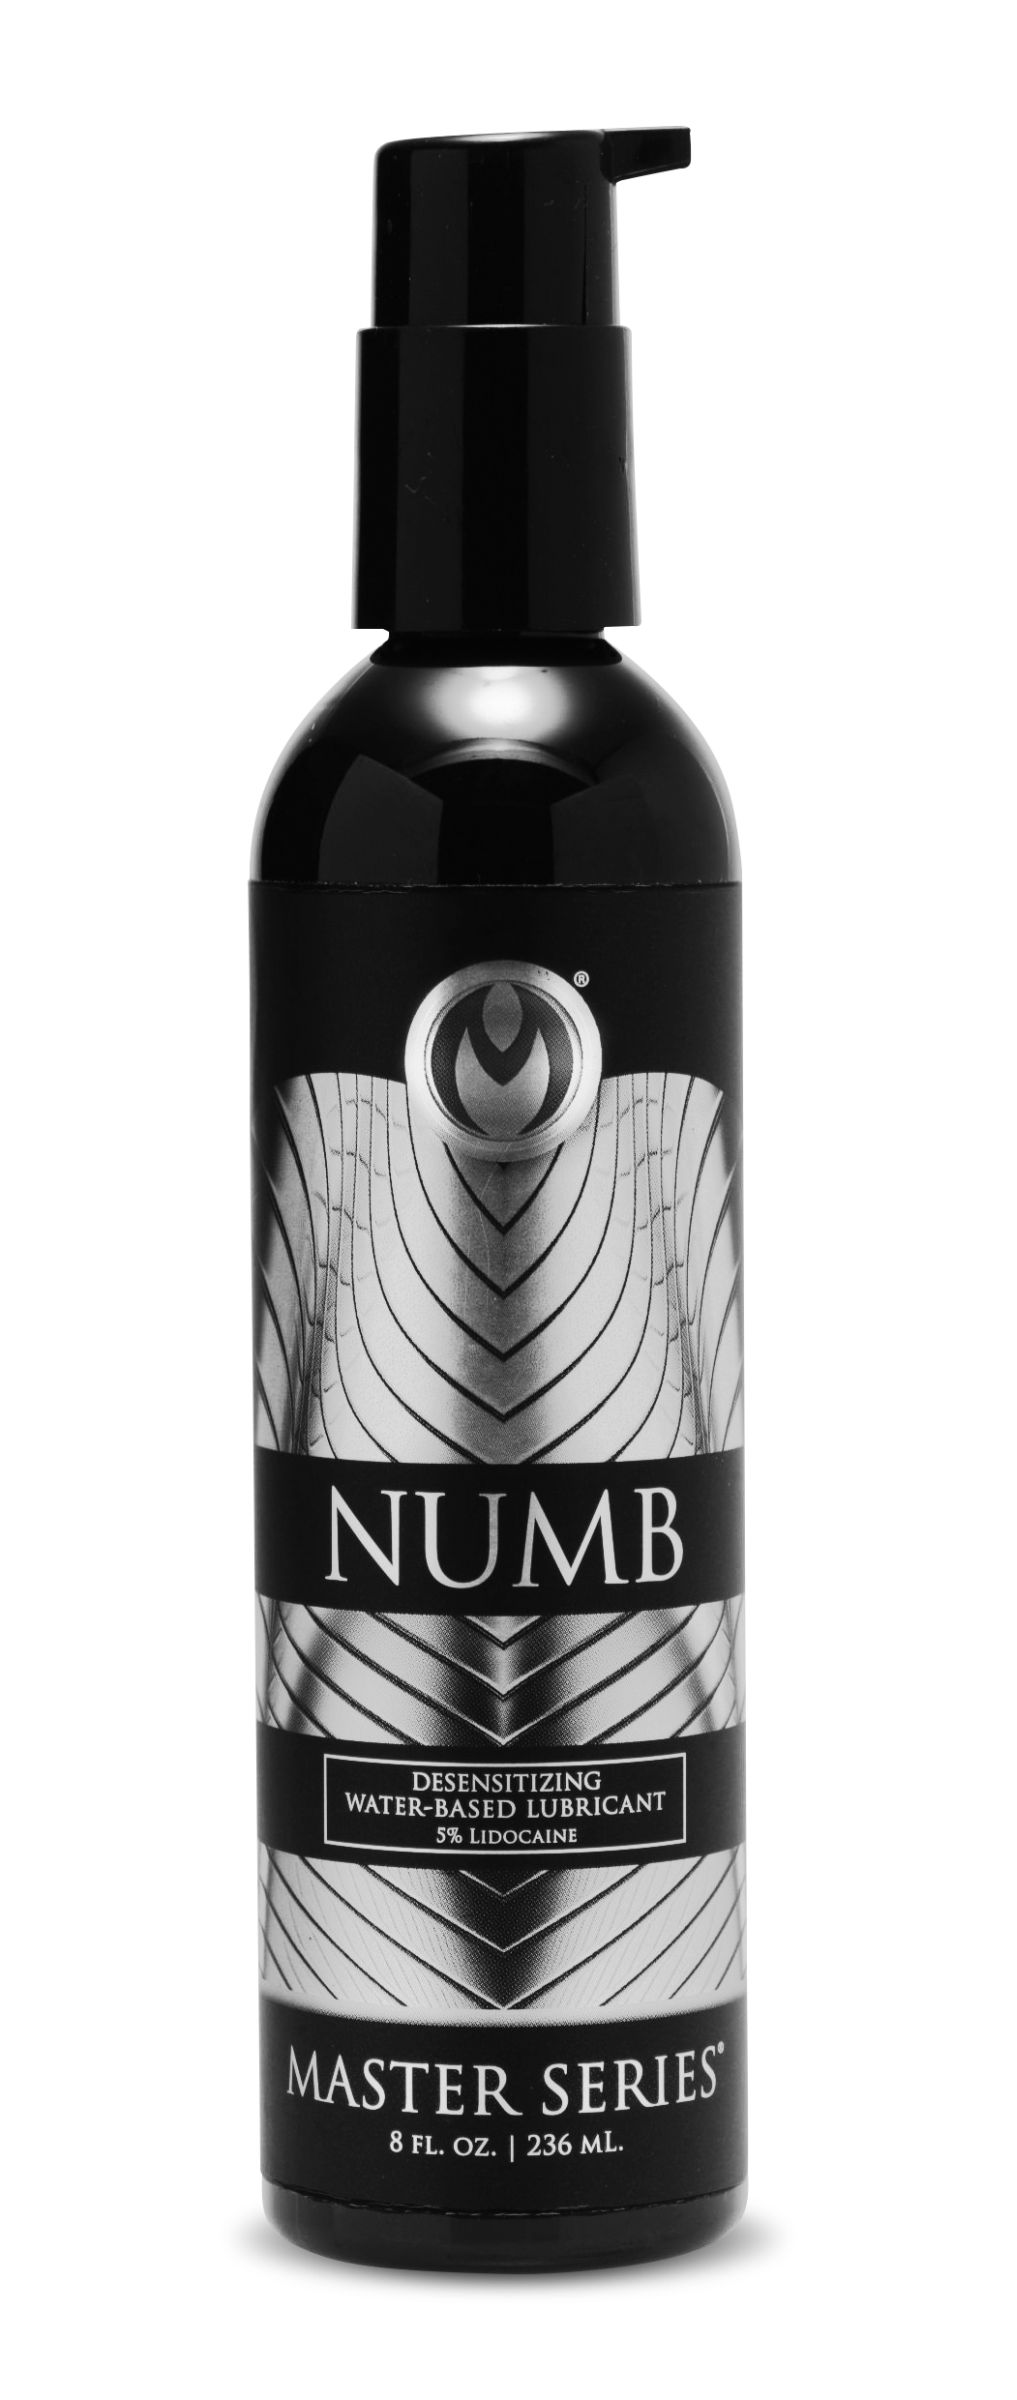 Numb+Desensitizing+Water+Based+Lubricant+with+Lidocaine+-+8+oz